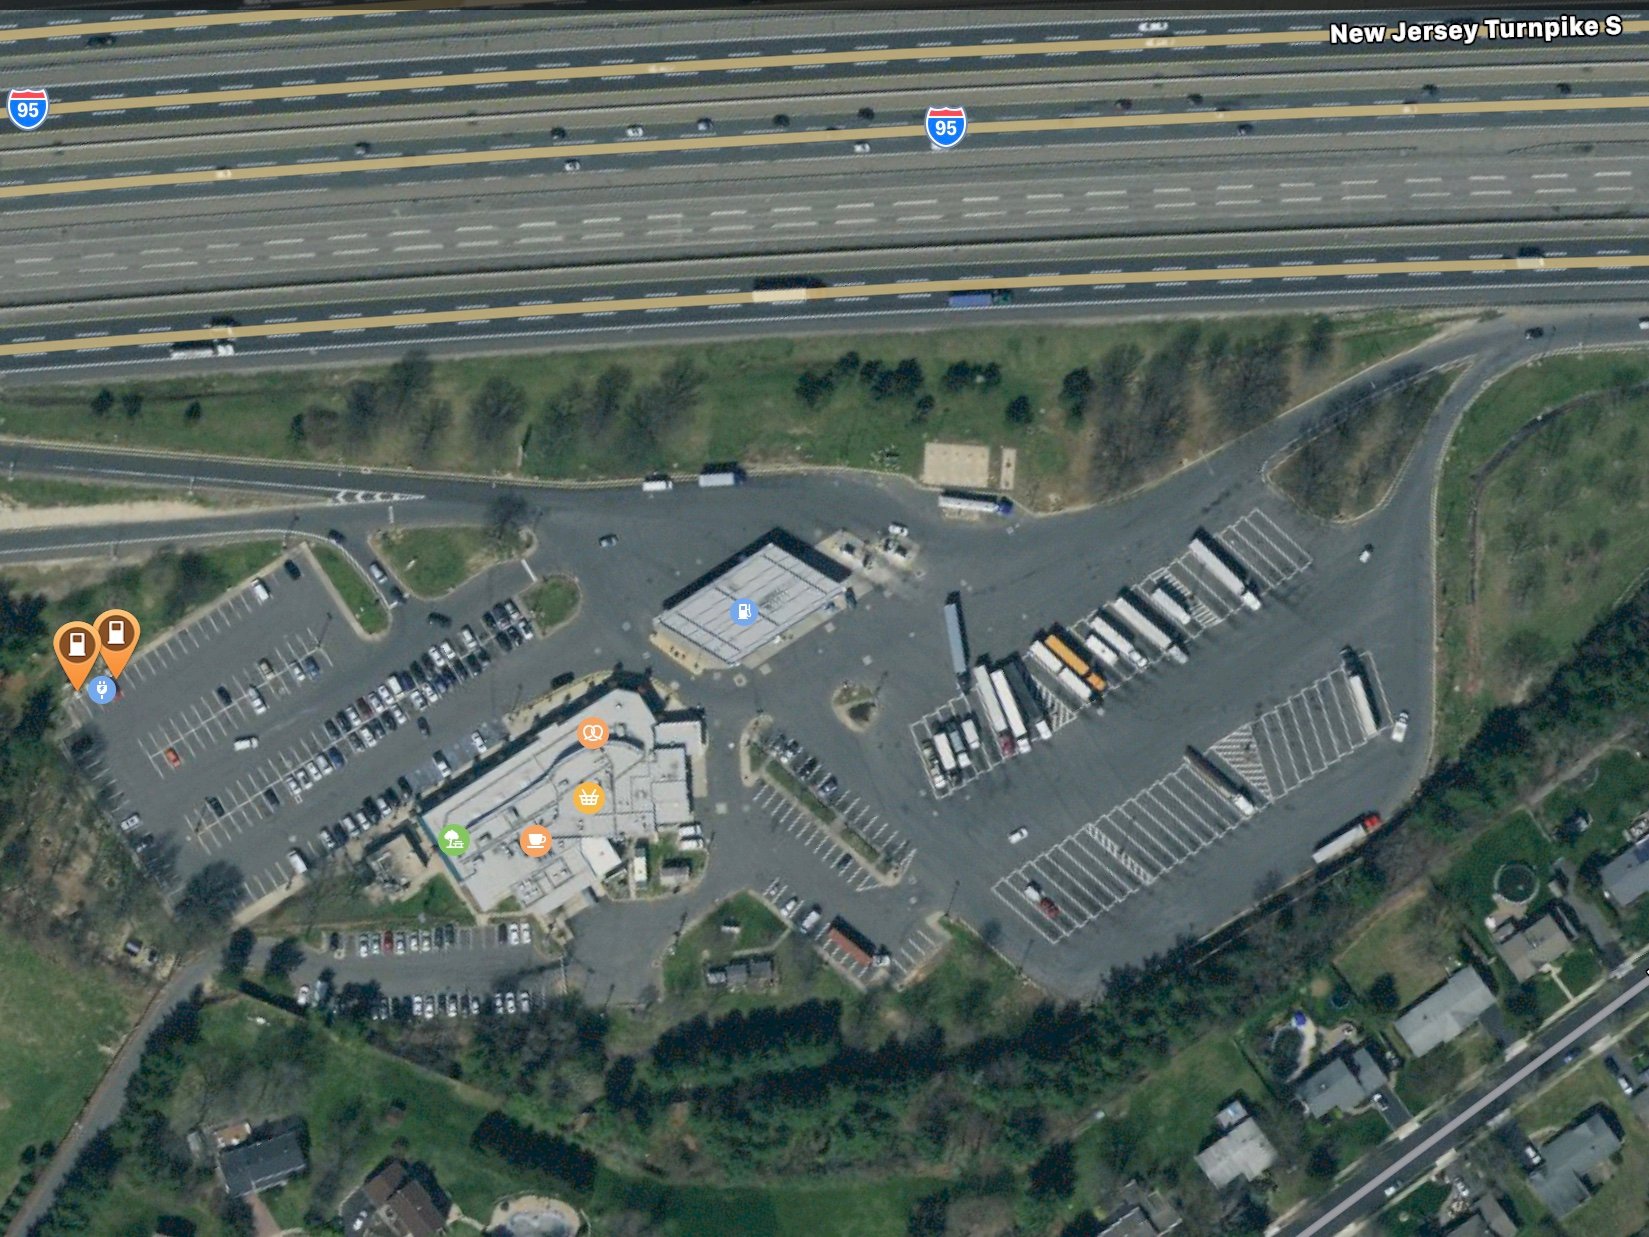 superchargers-on-the-nj-turnpike-speculation-discussion-tesla